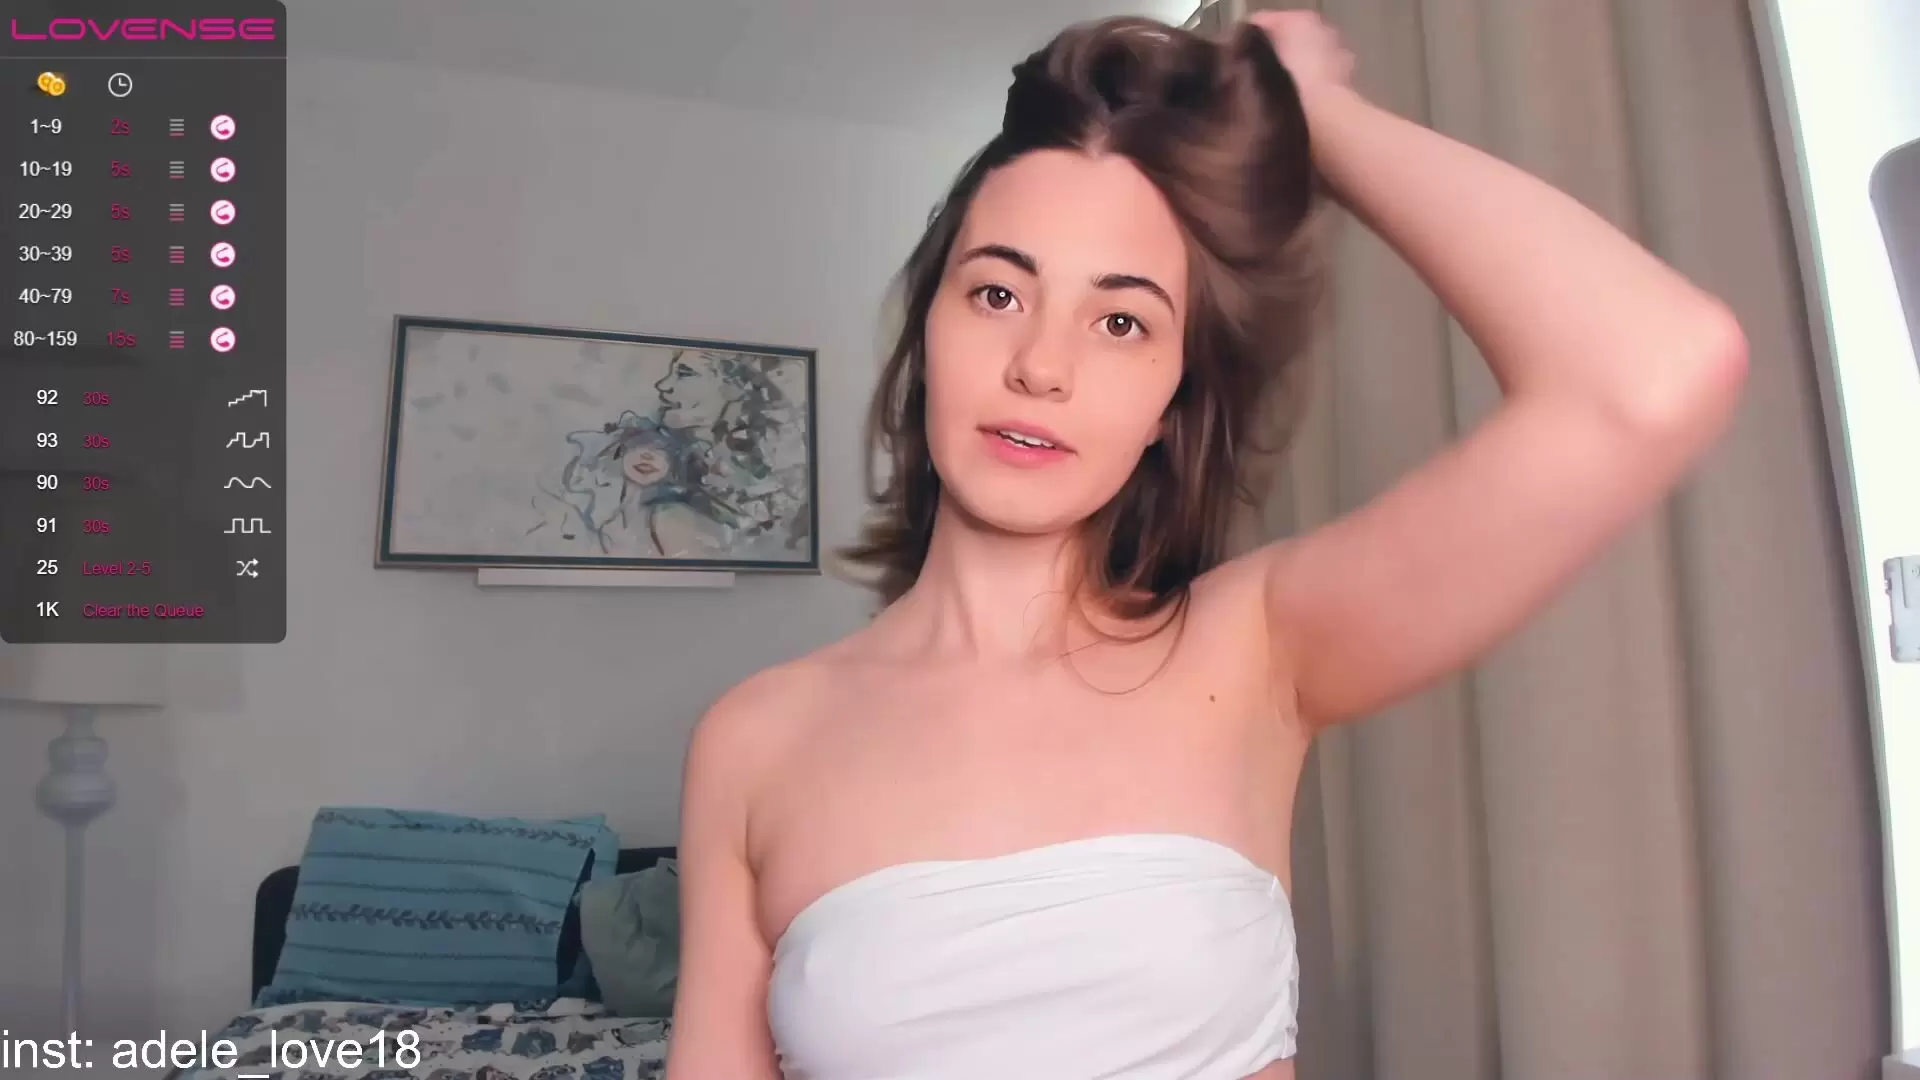 1920px x 1080px - Morning_smilee - Video [Chaturbate] big-ass-gape free-hardcore-porn-videos  long athetic-body